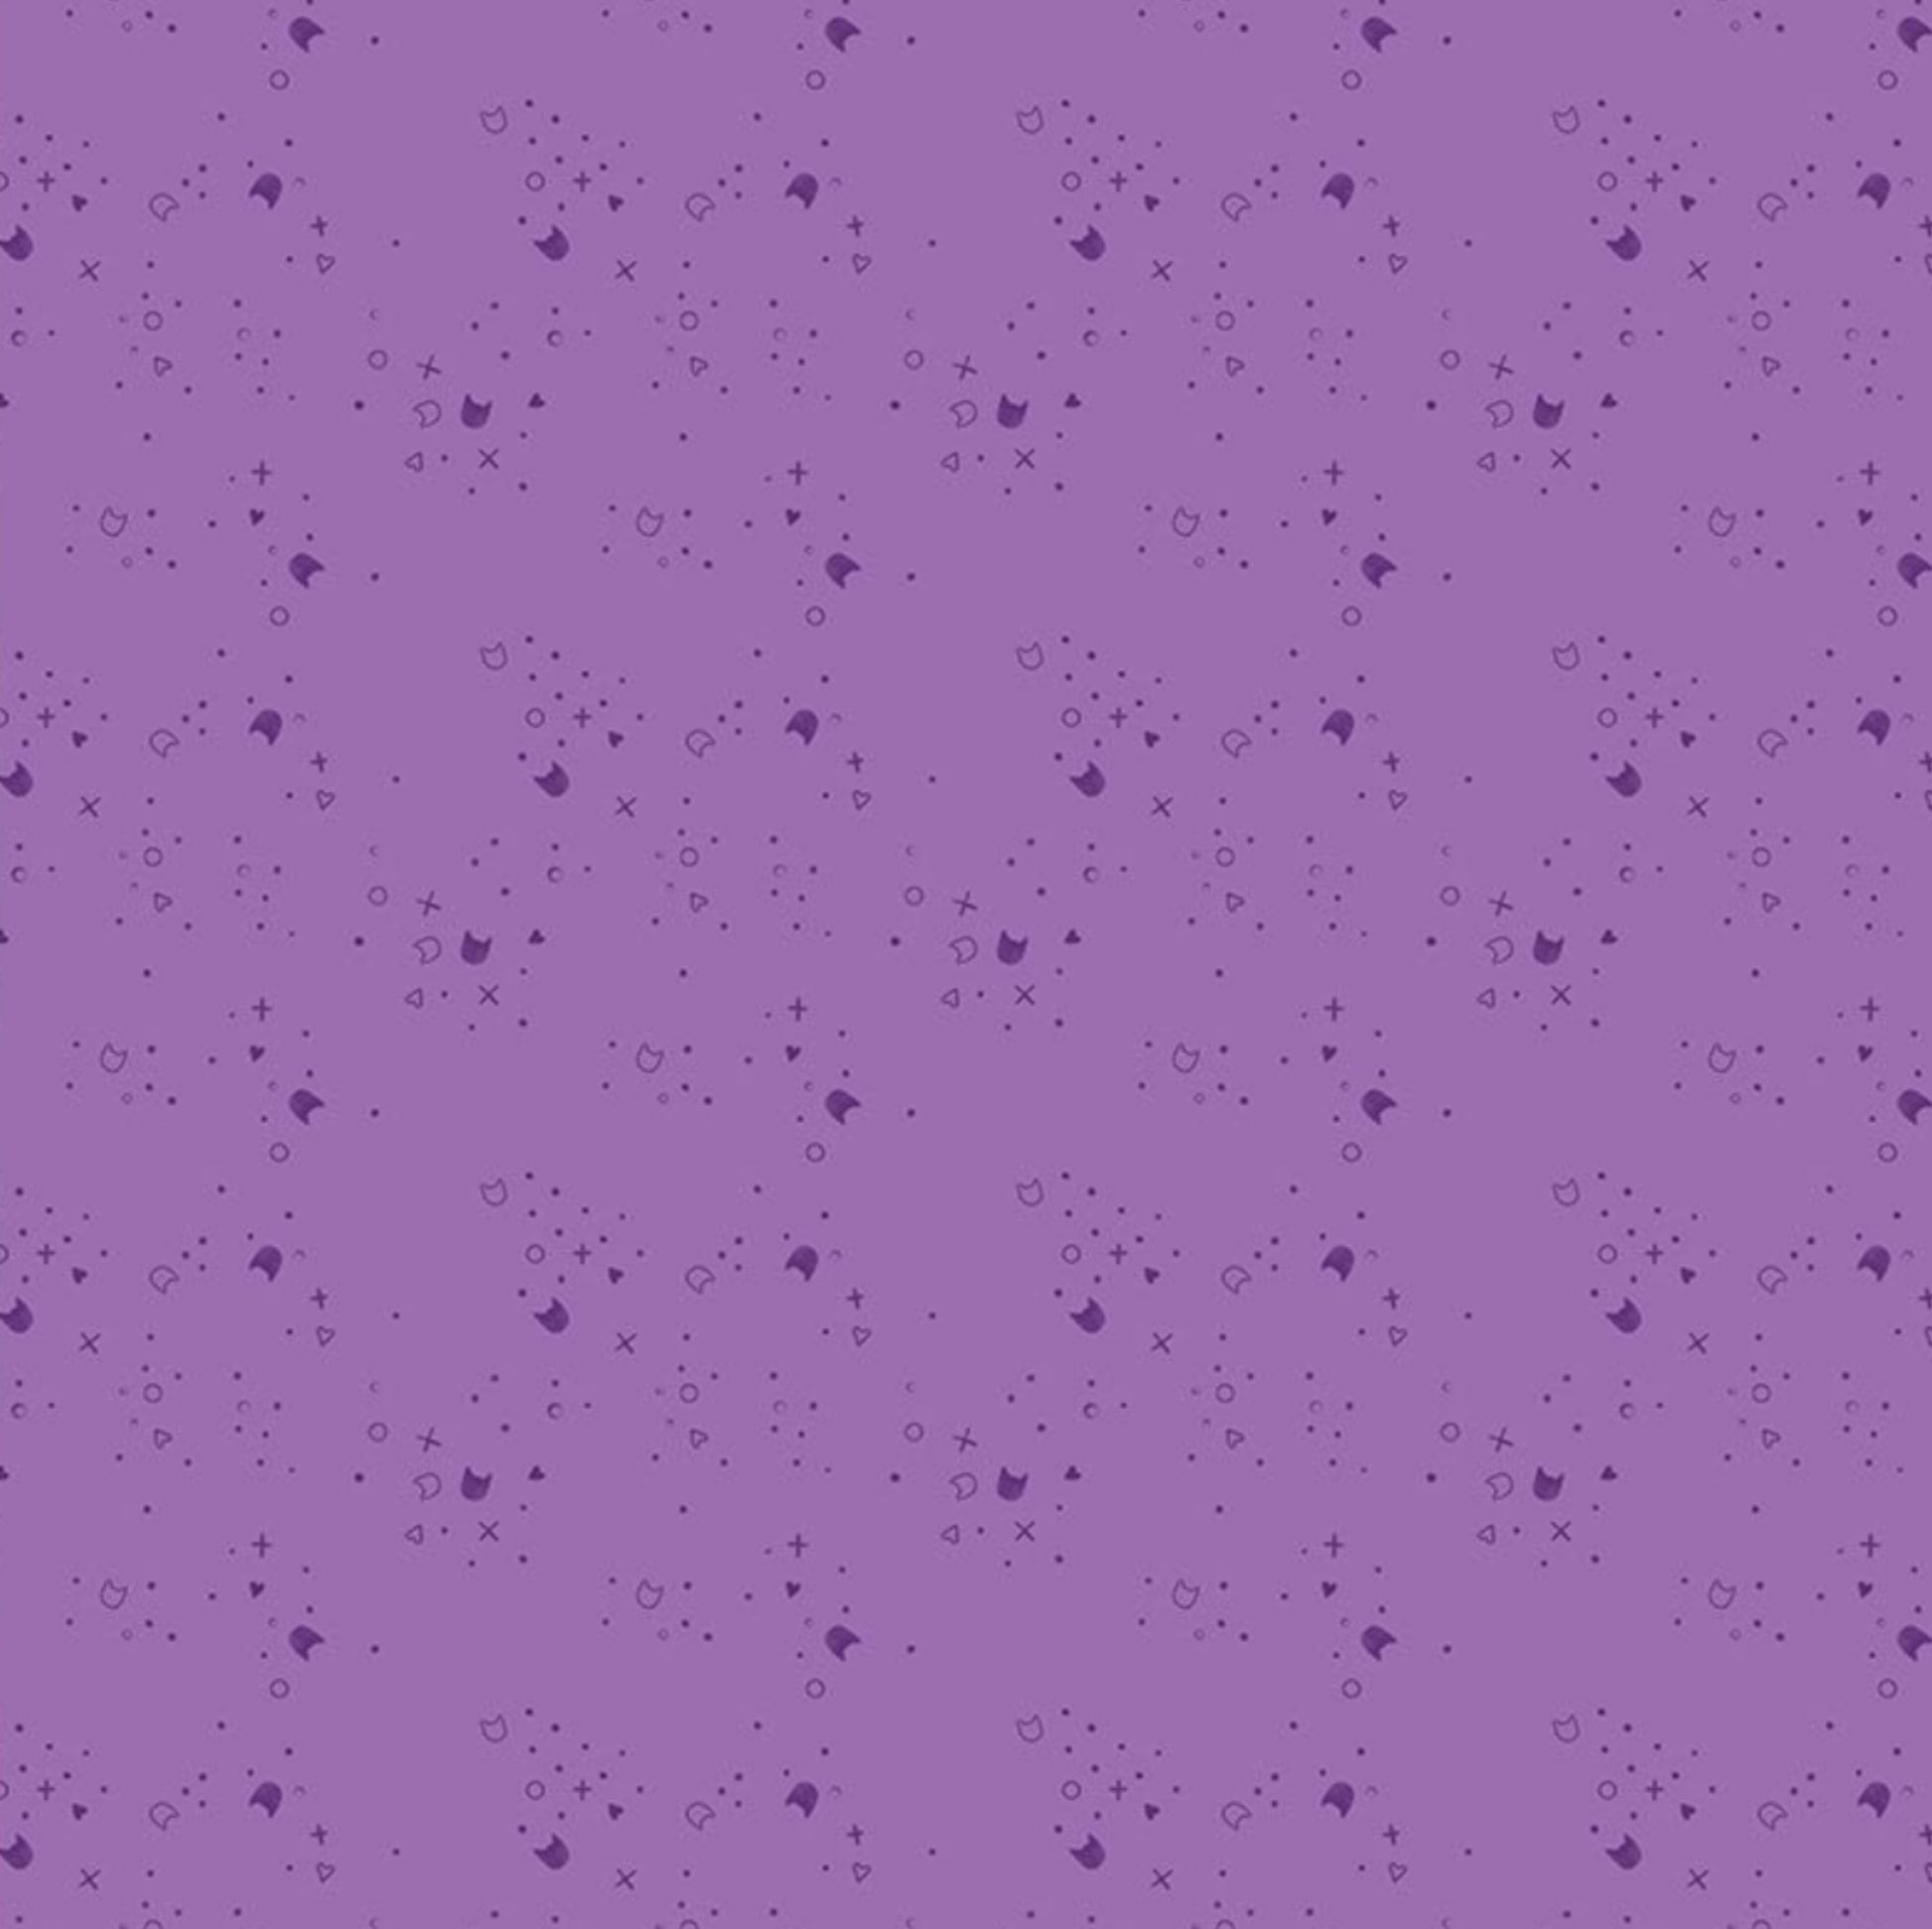 Kitty Litter Fabric Blender in Thistle - from the Kitty Litter Collection by Pammie Jane for Dear Stella Fabrics